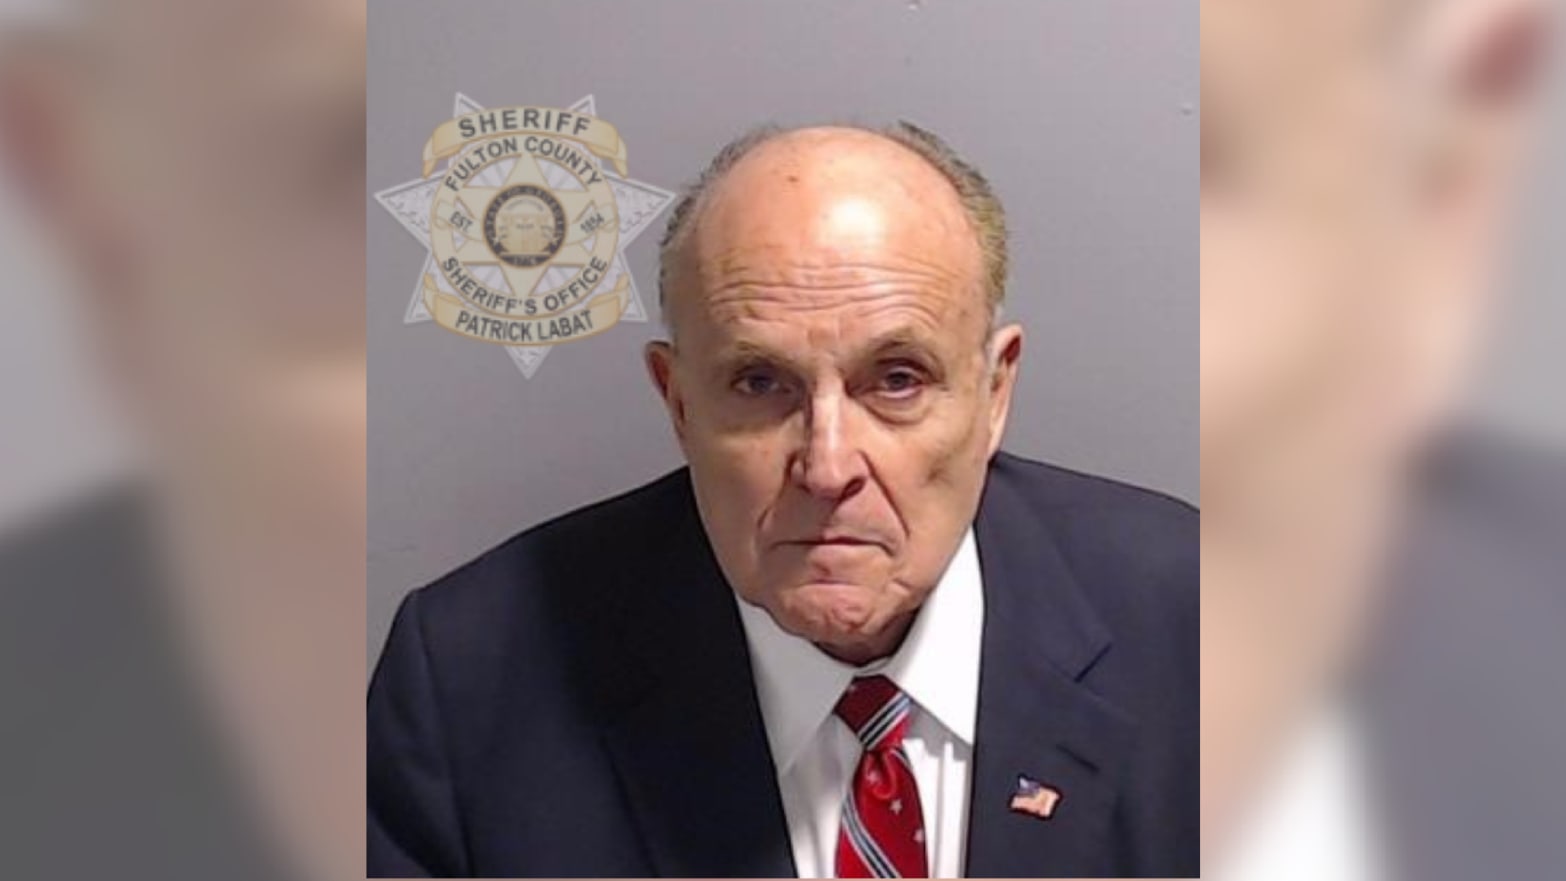 Rudy Giuliani seen in a booking photo from the Fulton County Jail